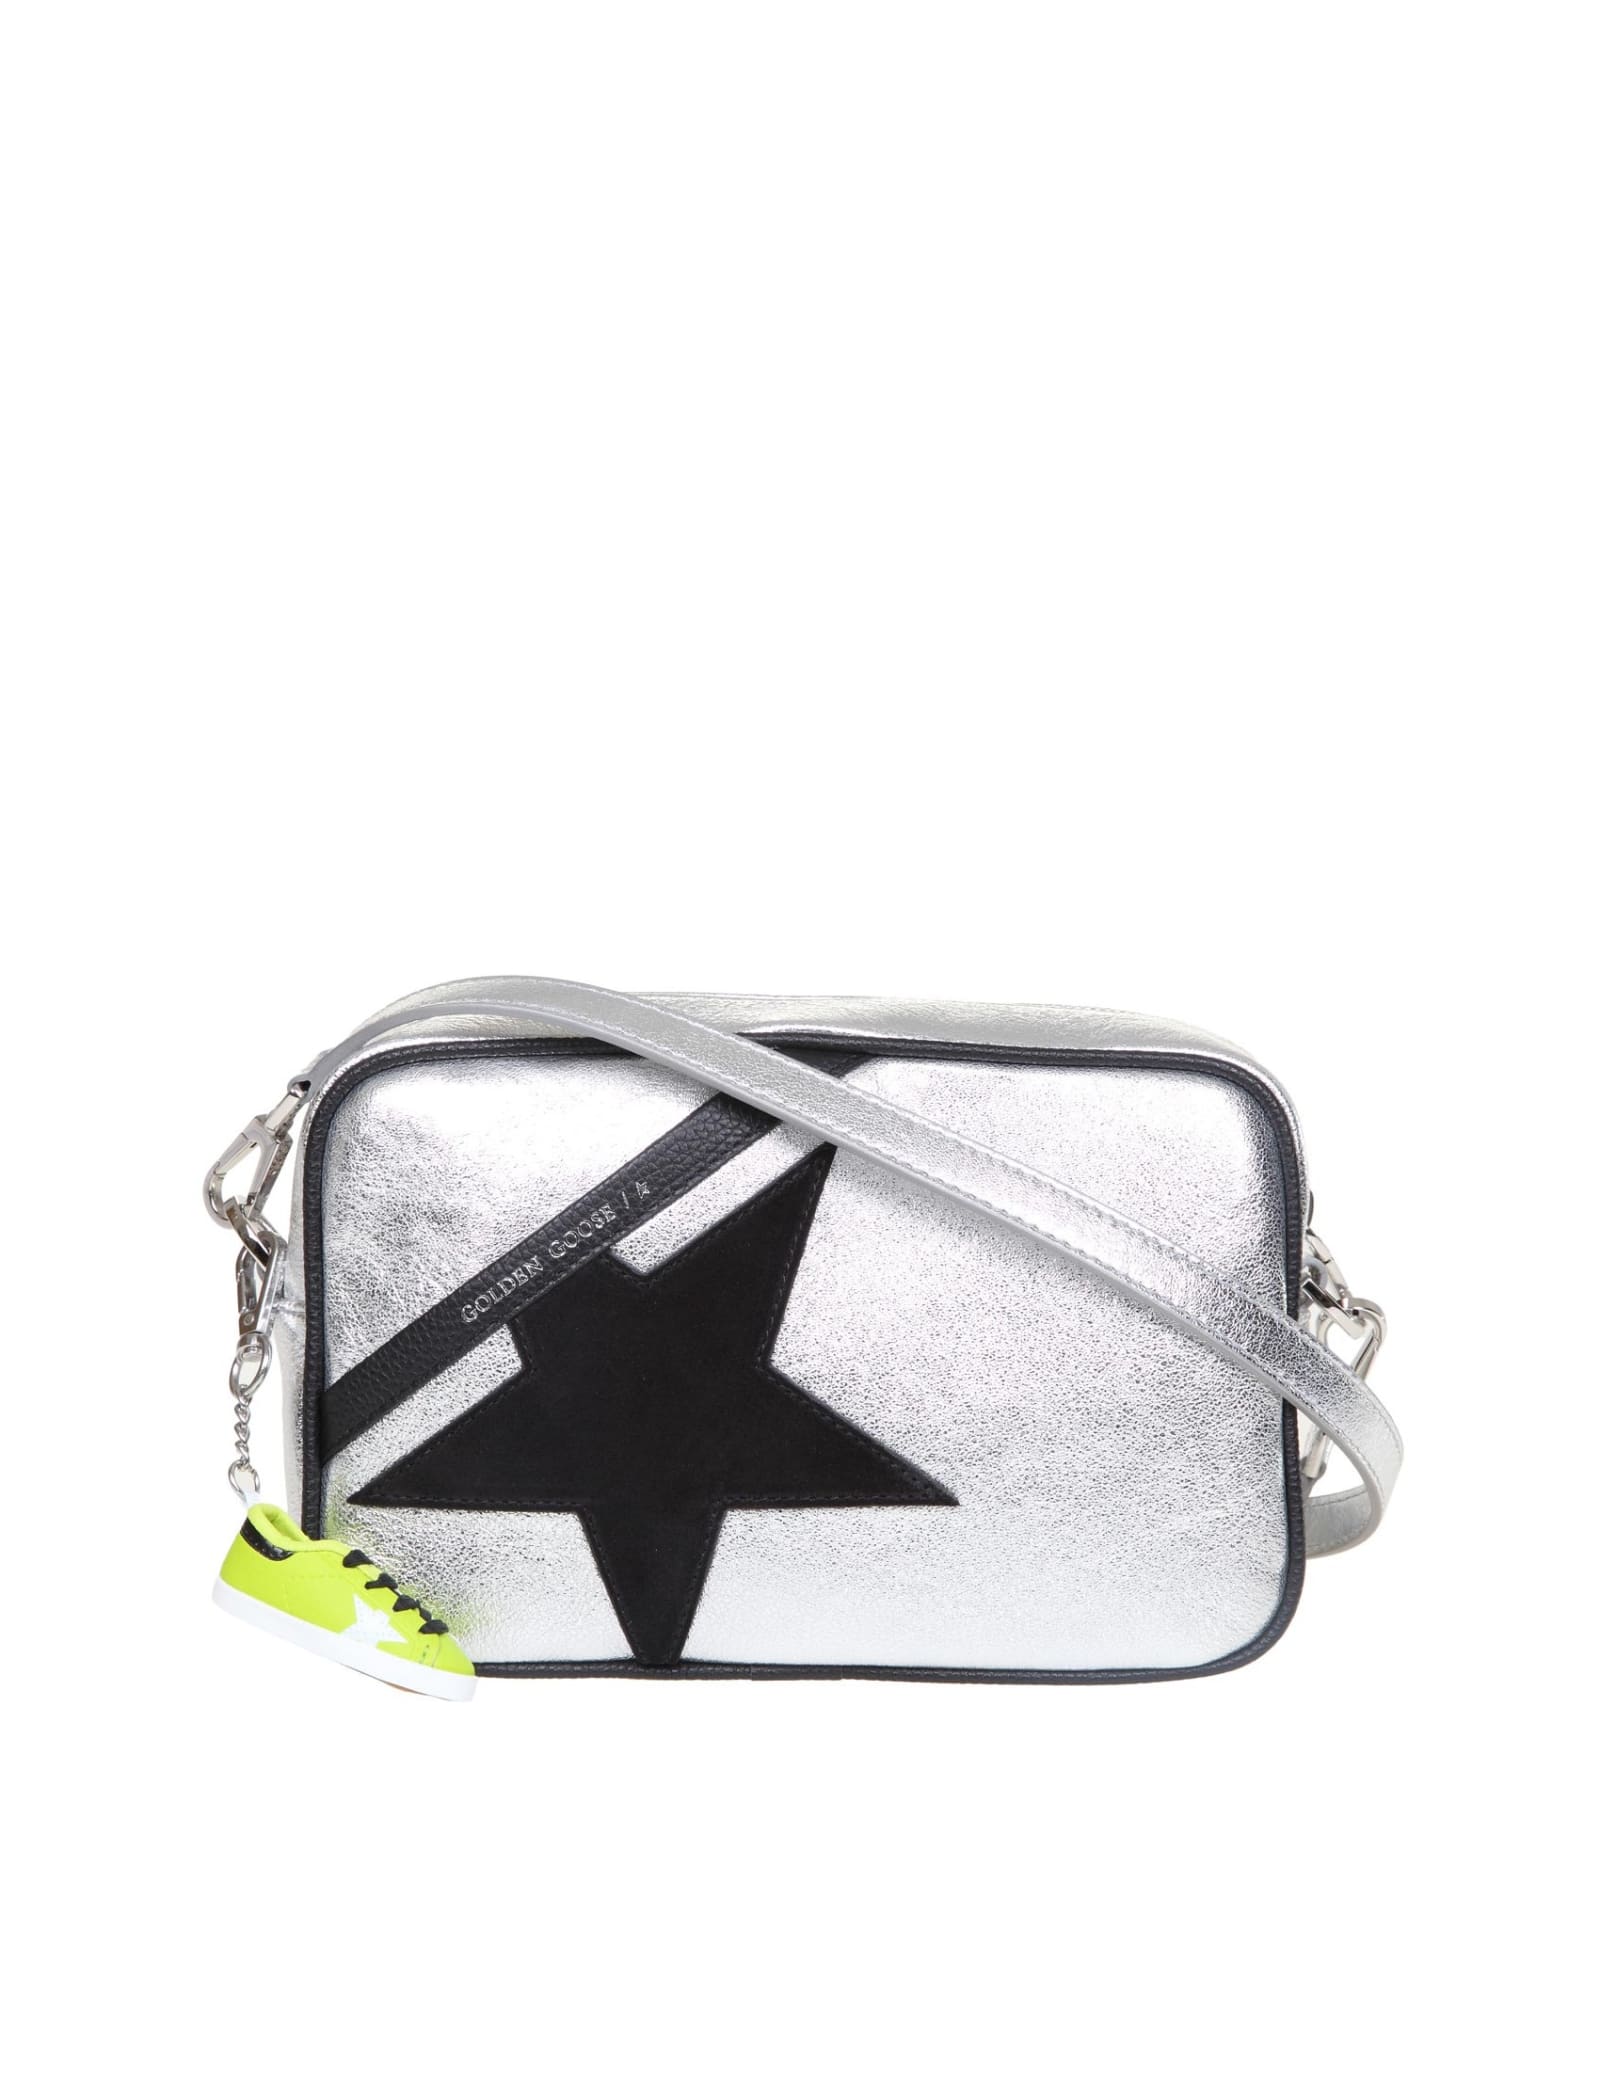 Golden Goose Star Bag In Silver Laminated Leather